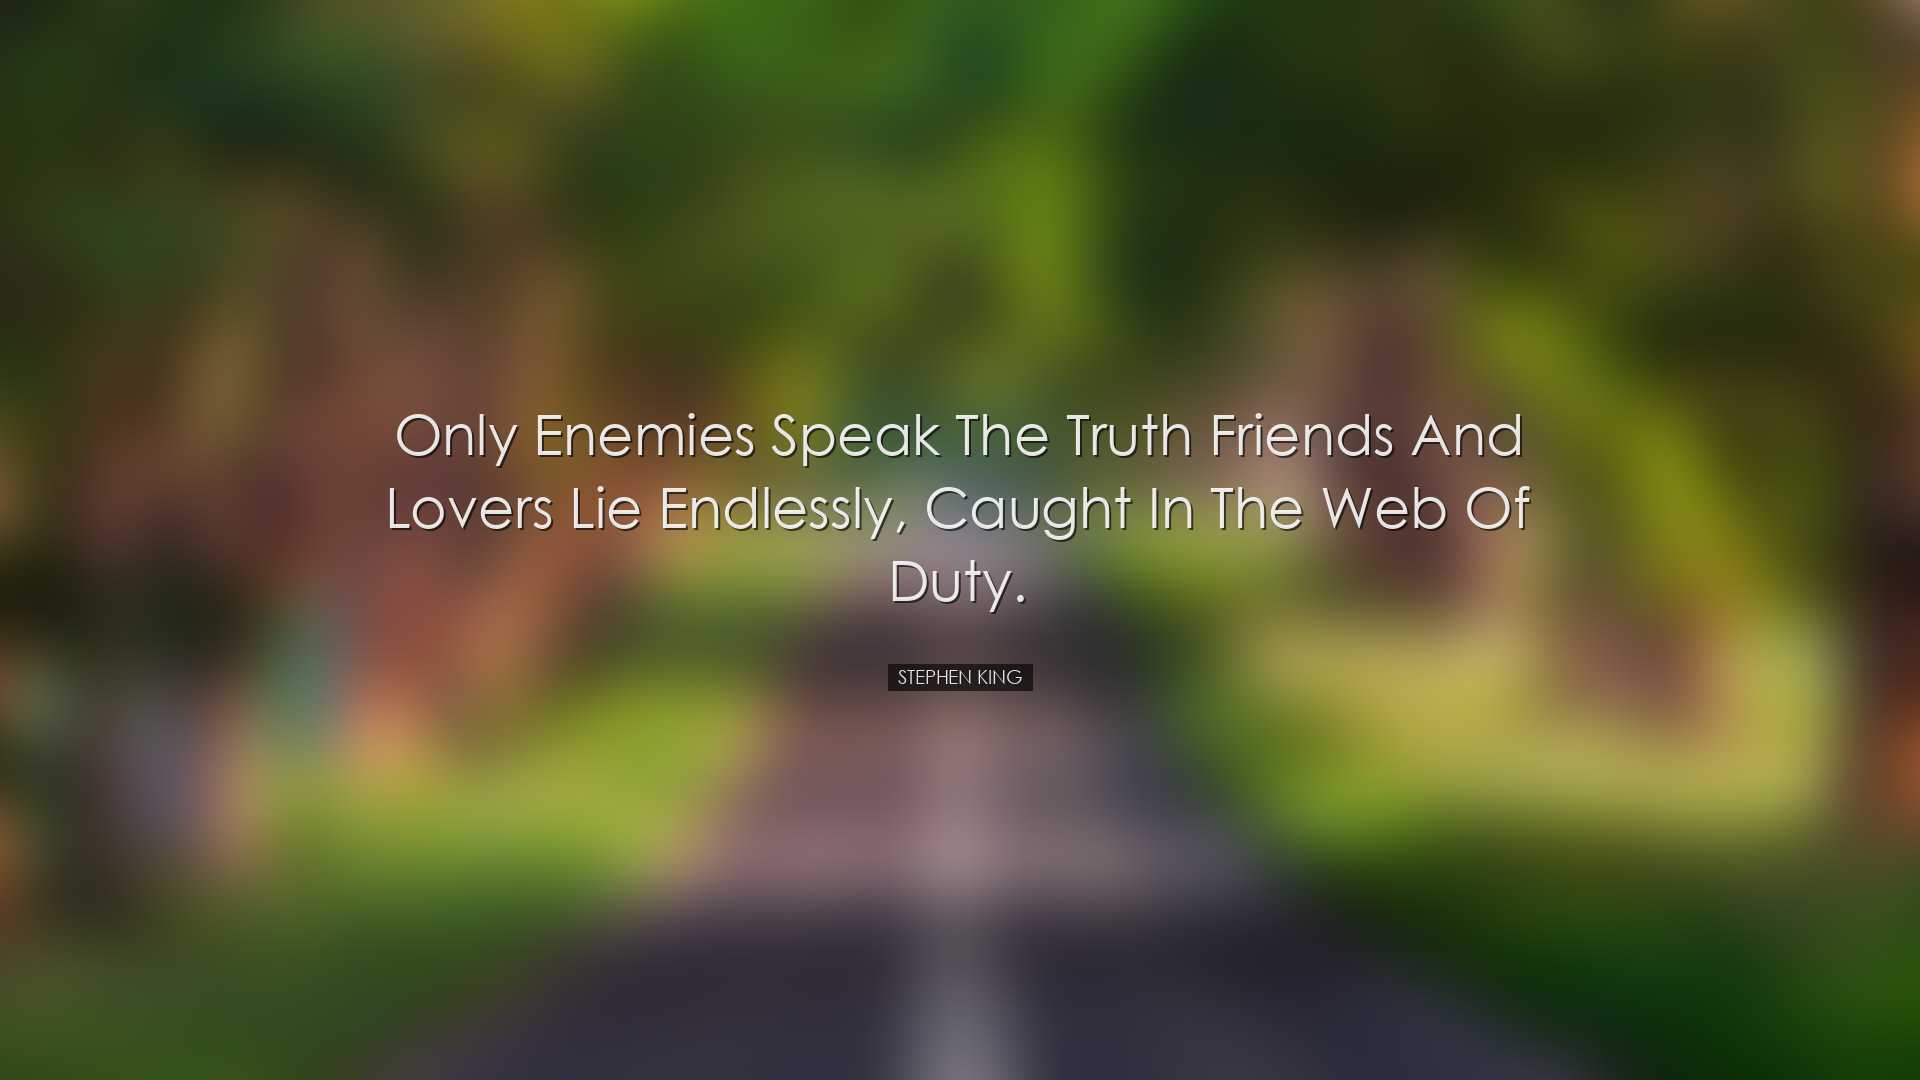 Only enemies speak the truth friends and lovers lie endlessly, cau